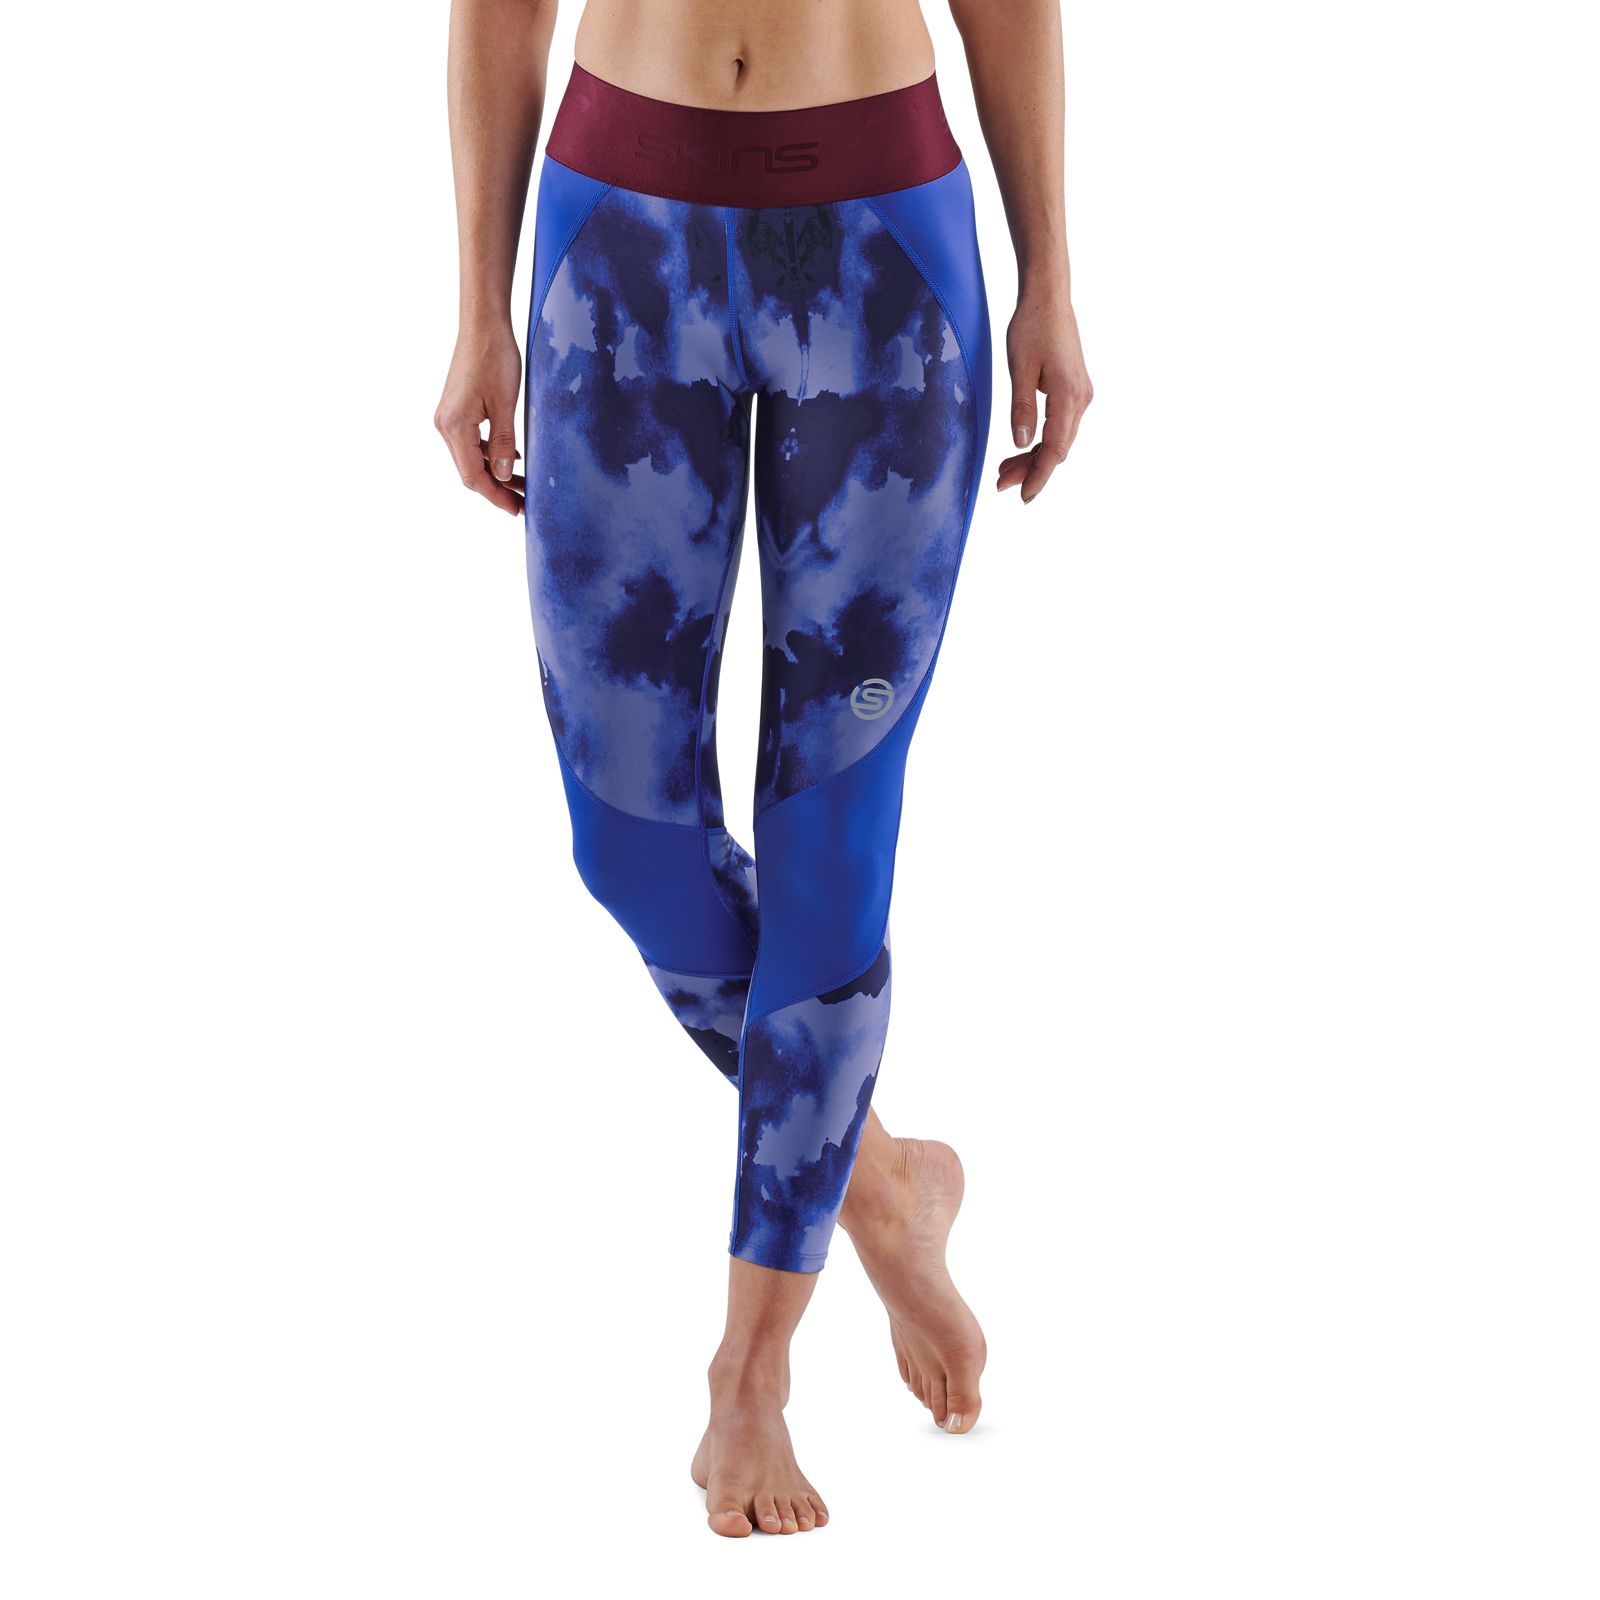 SKINS SERIES-3 WOMEN'S LONG TIGHTS BLUE CAMO - SKINS Compression USA